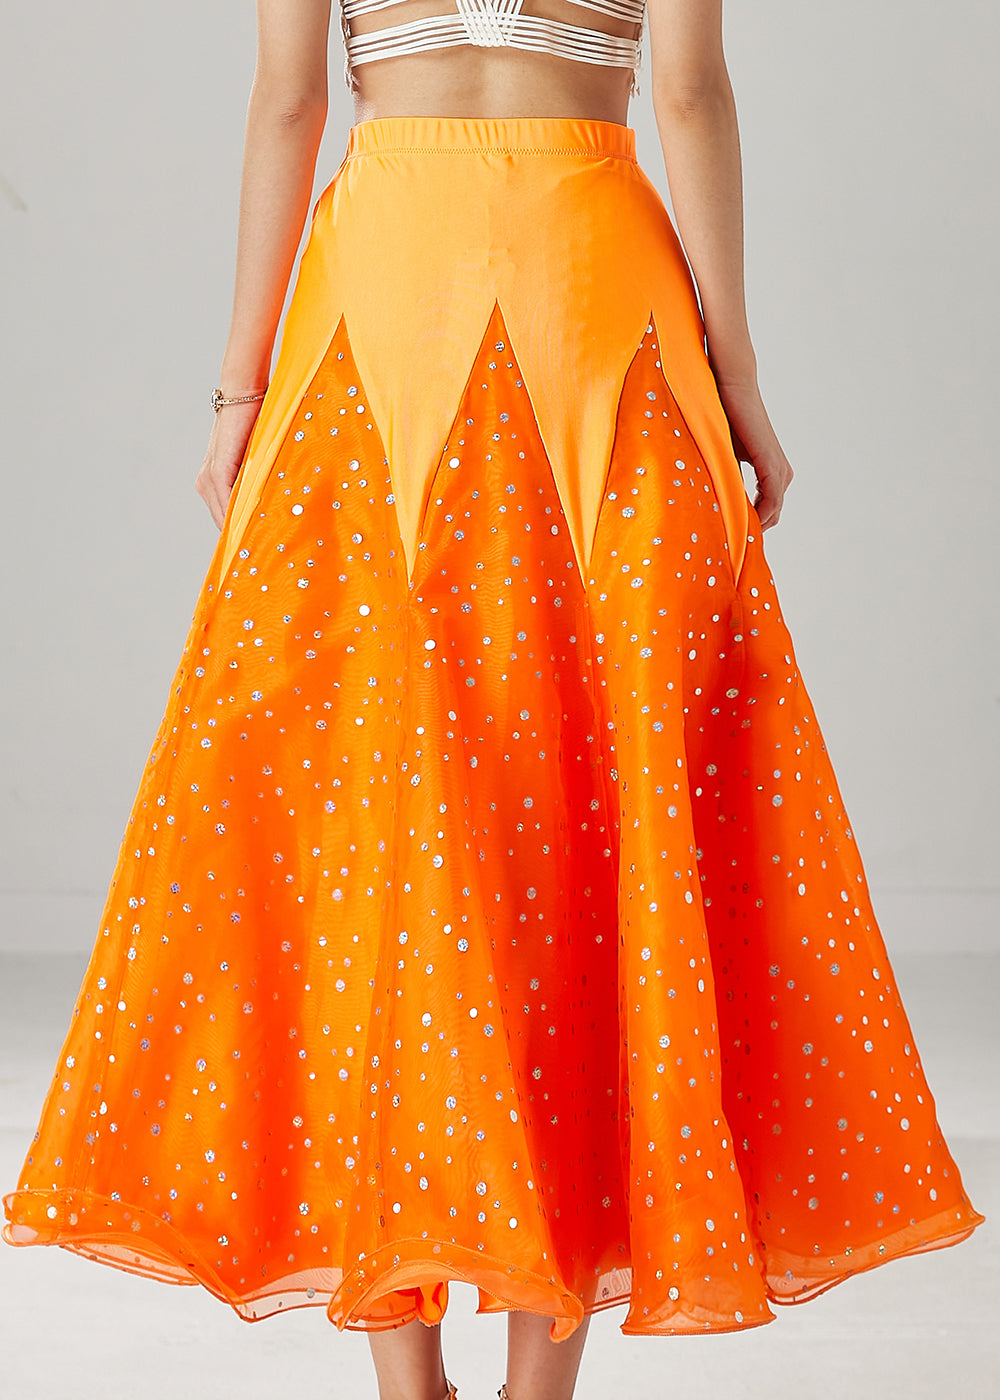 French Orange Silm Fit Patchwork Zircon Tulle Skirts Spring